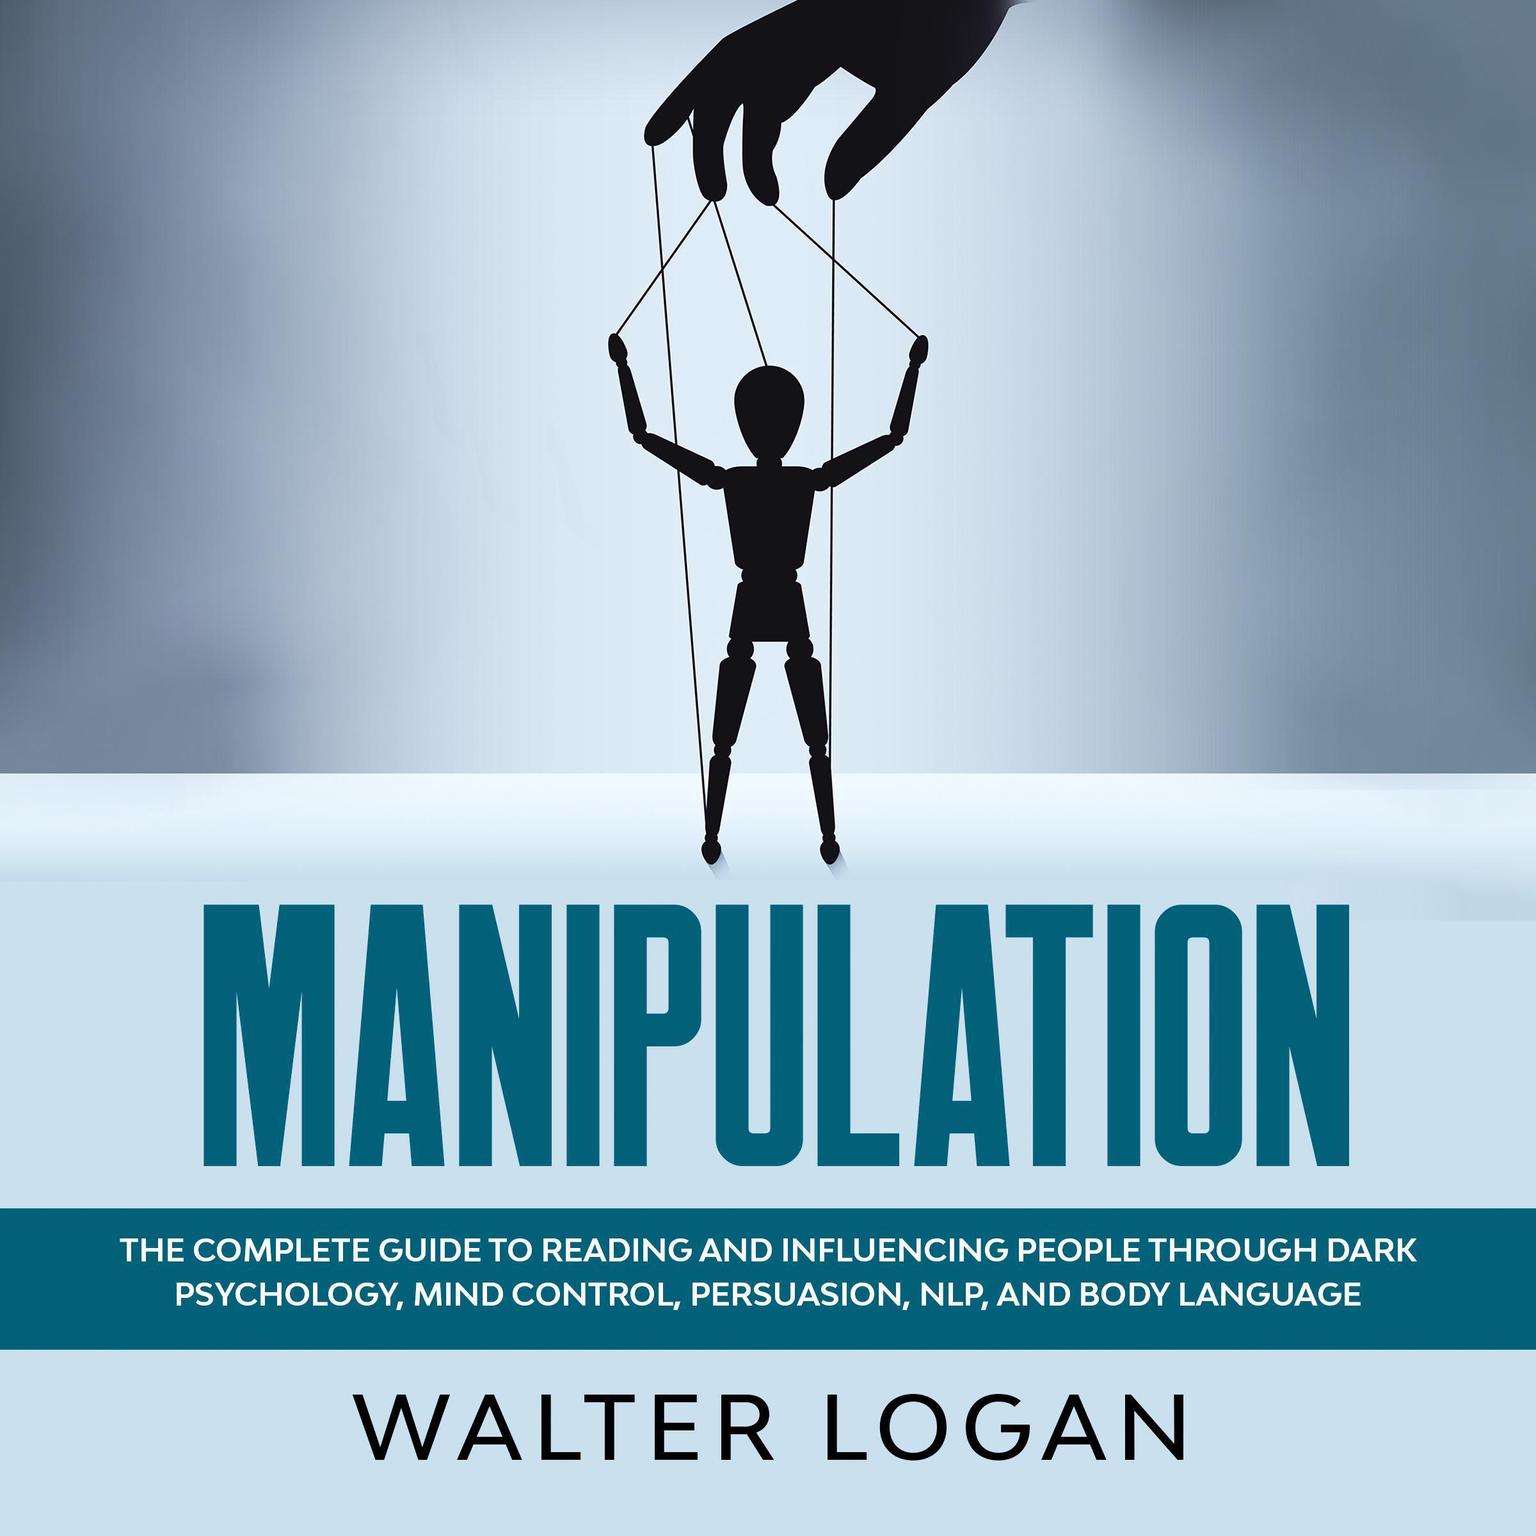 Manipulation: The Complete Guide to Reading and Influencing People through Dark Psychology, Mind Control, Persuasion, NLP, and Body Language Audiobook, by Walter Logan